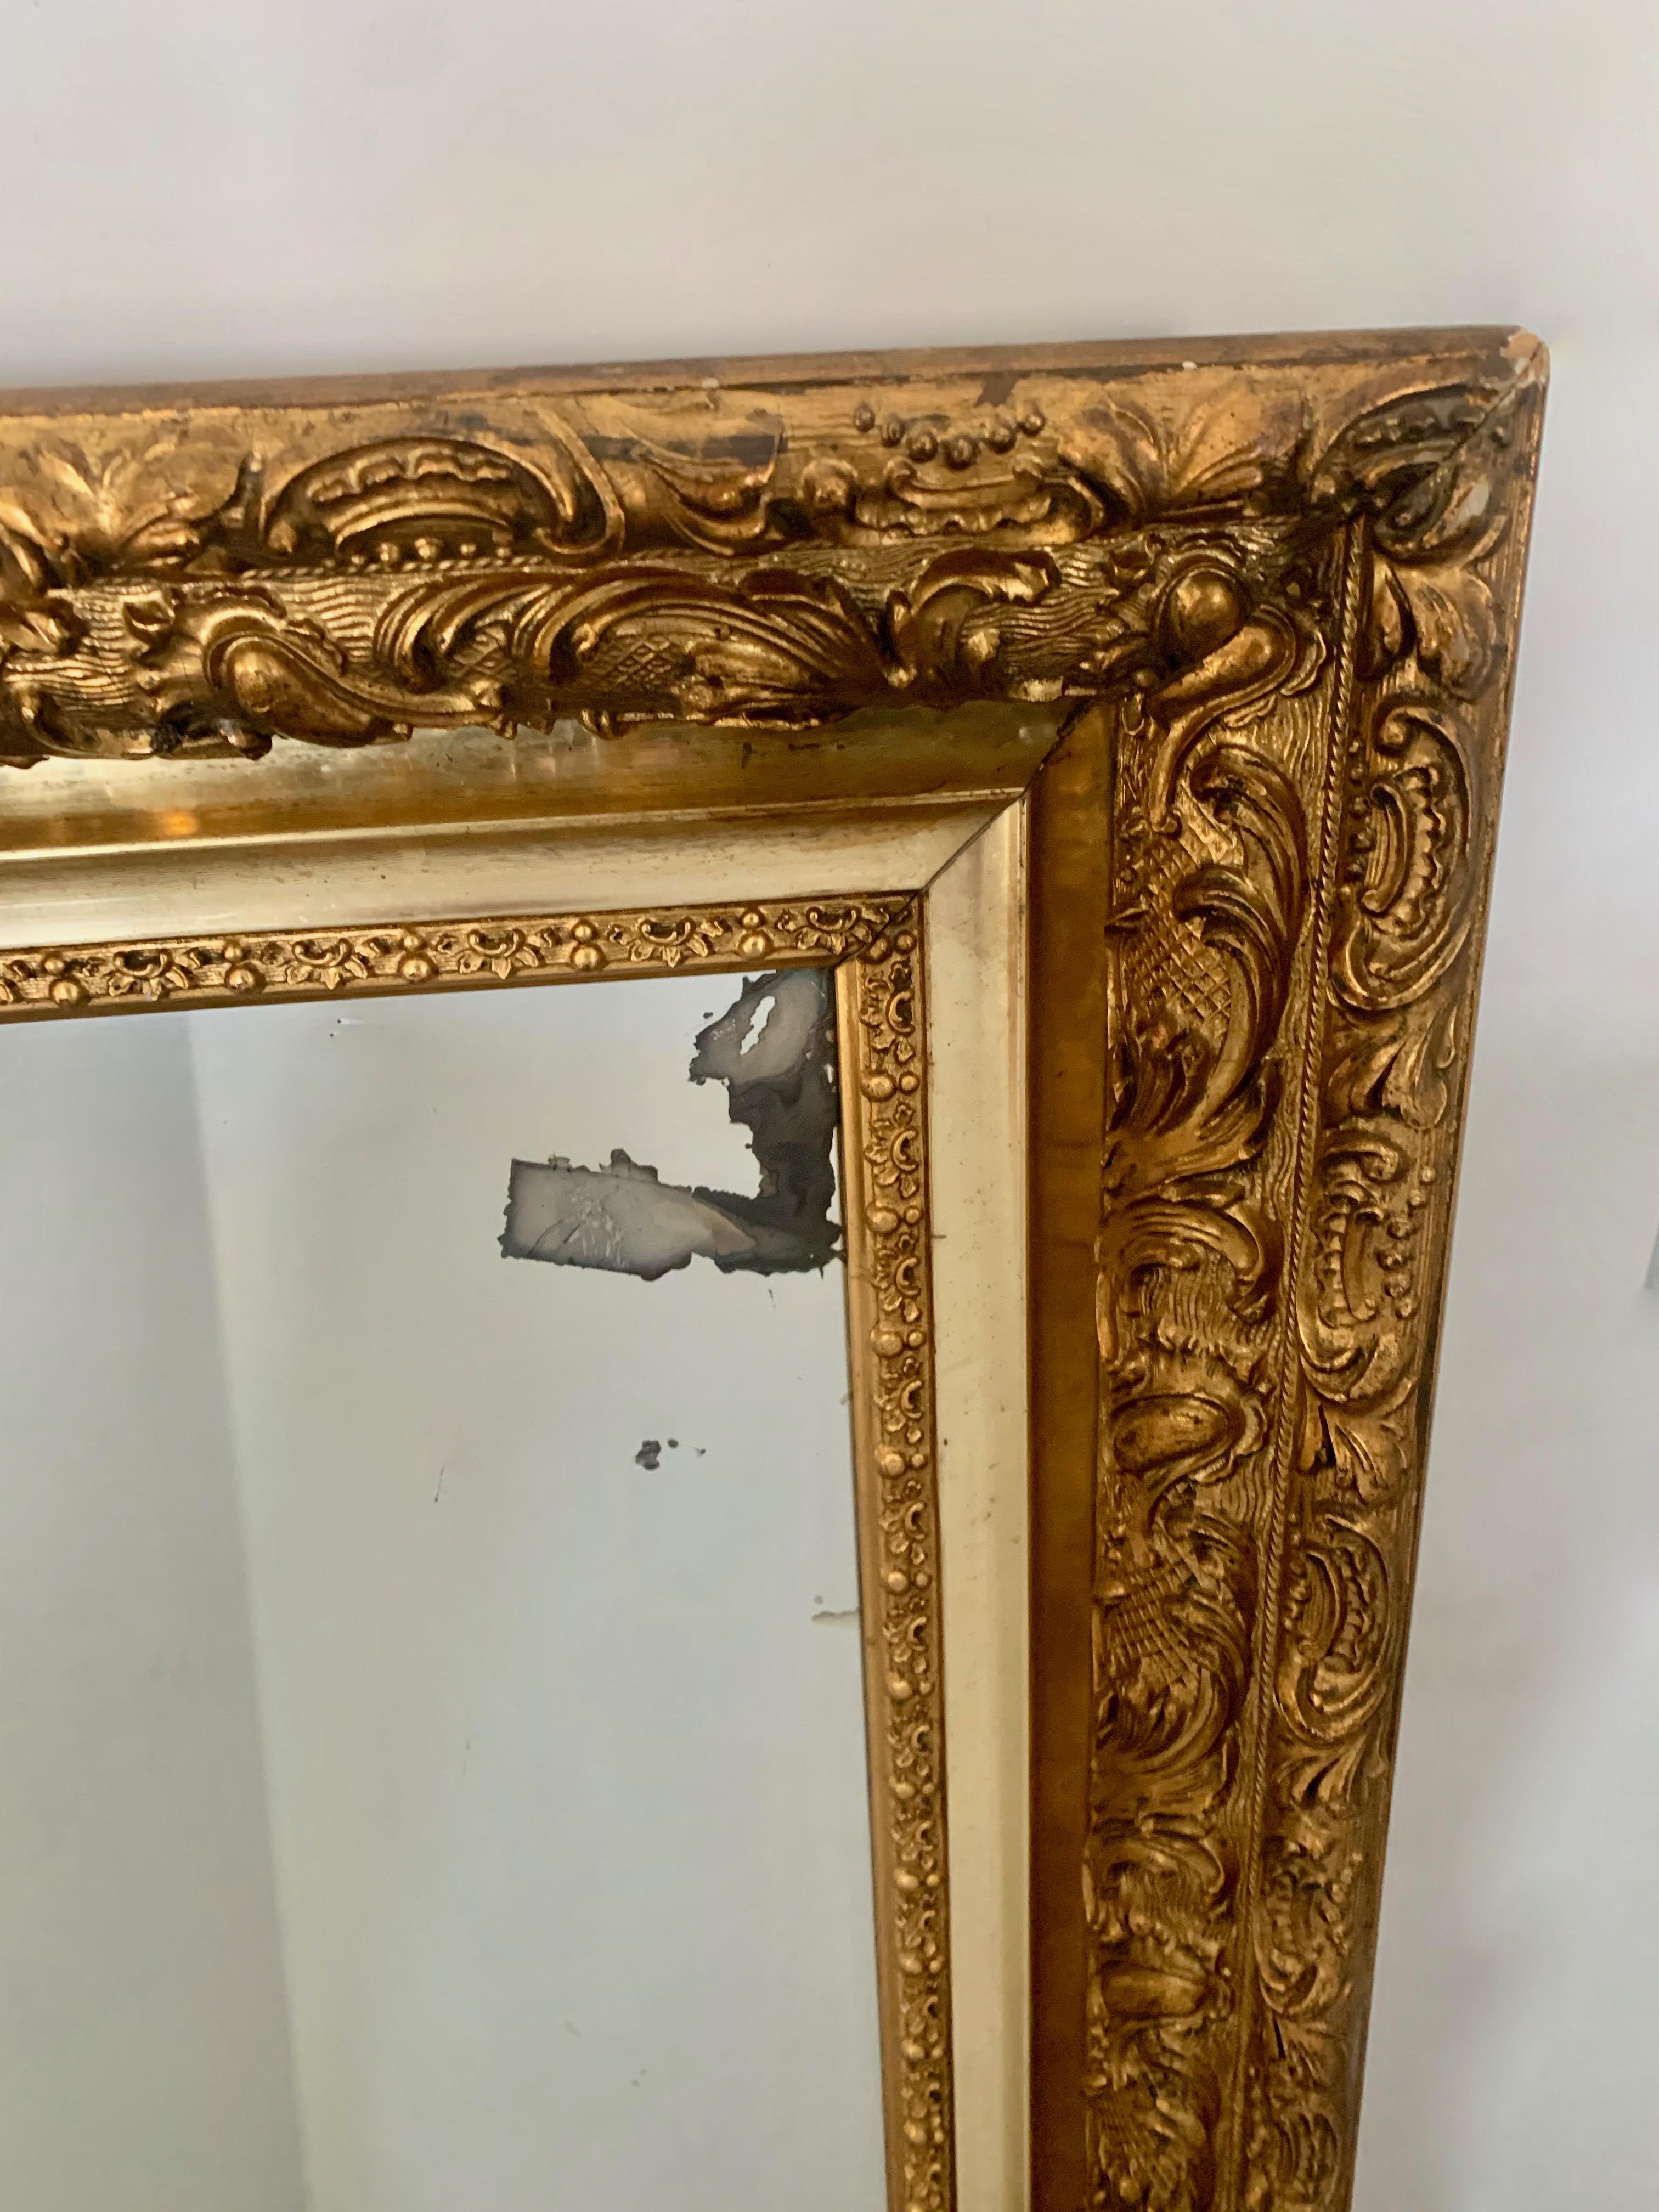 A simple yet wonderful gilt frame wall mirror. The mirror has a few condition issues, which we believe add to the charm... a great piece for a guest room, dressing room or bedroom.